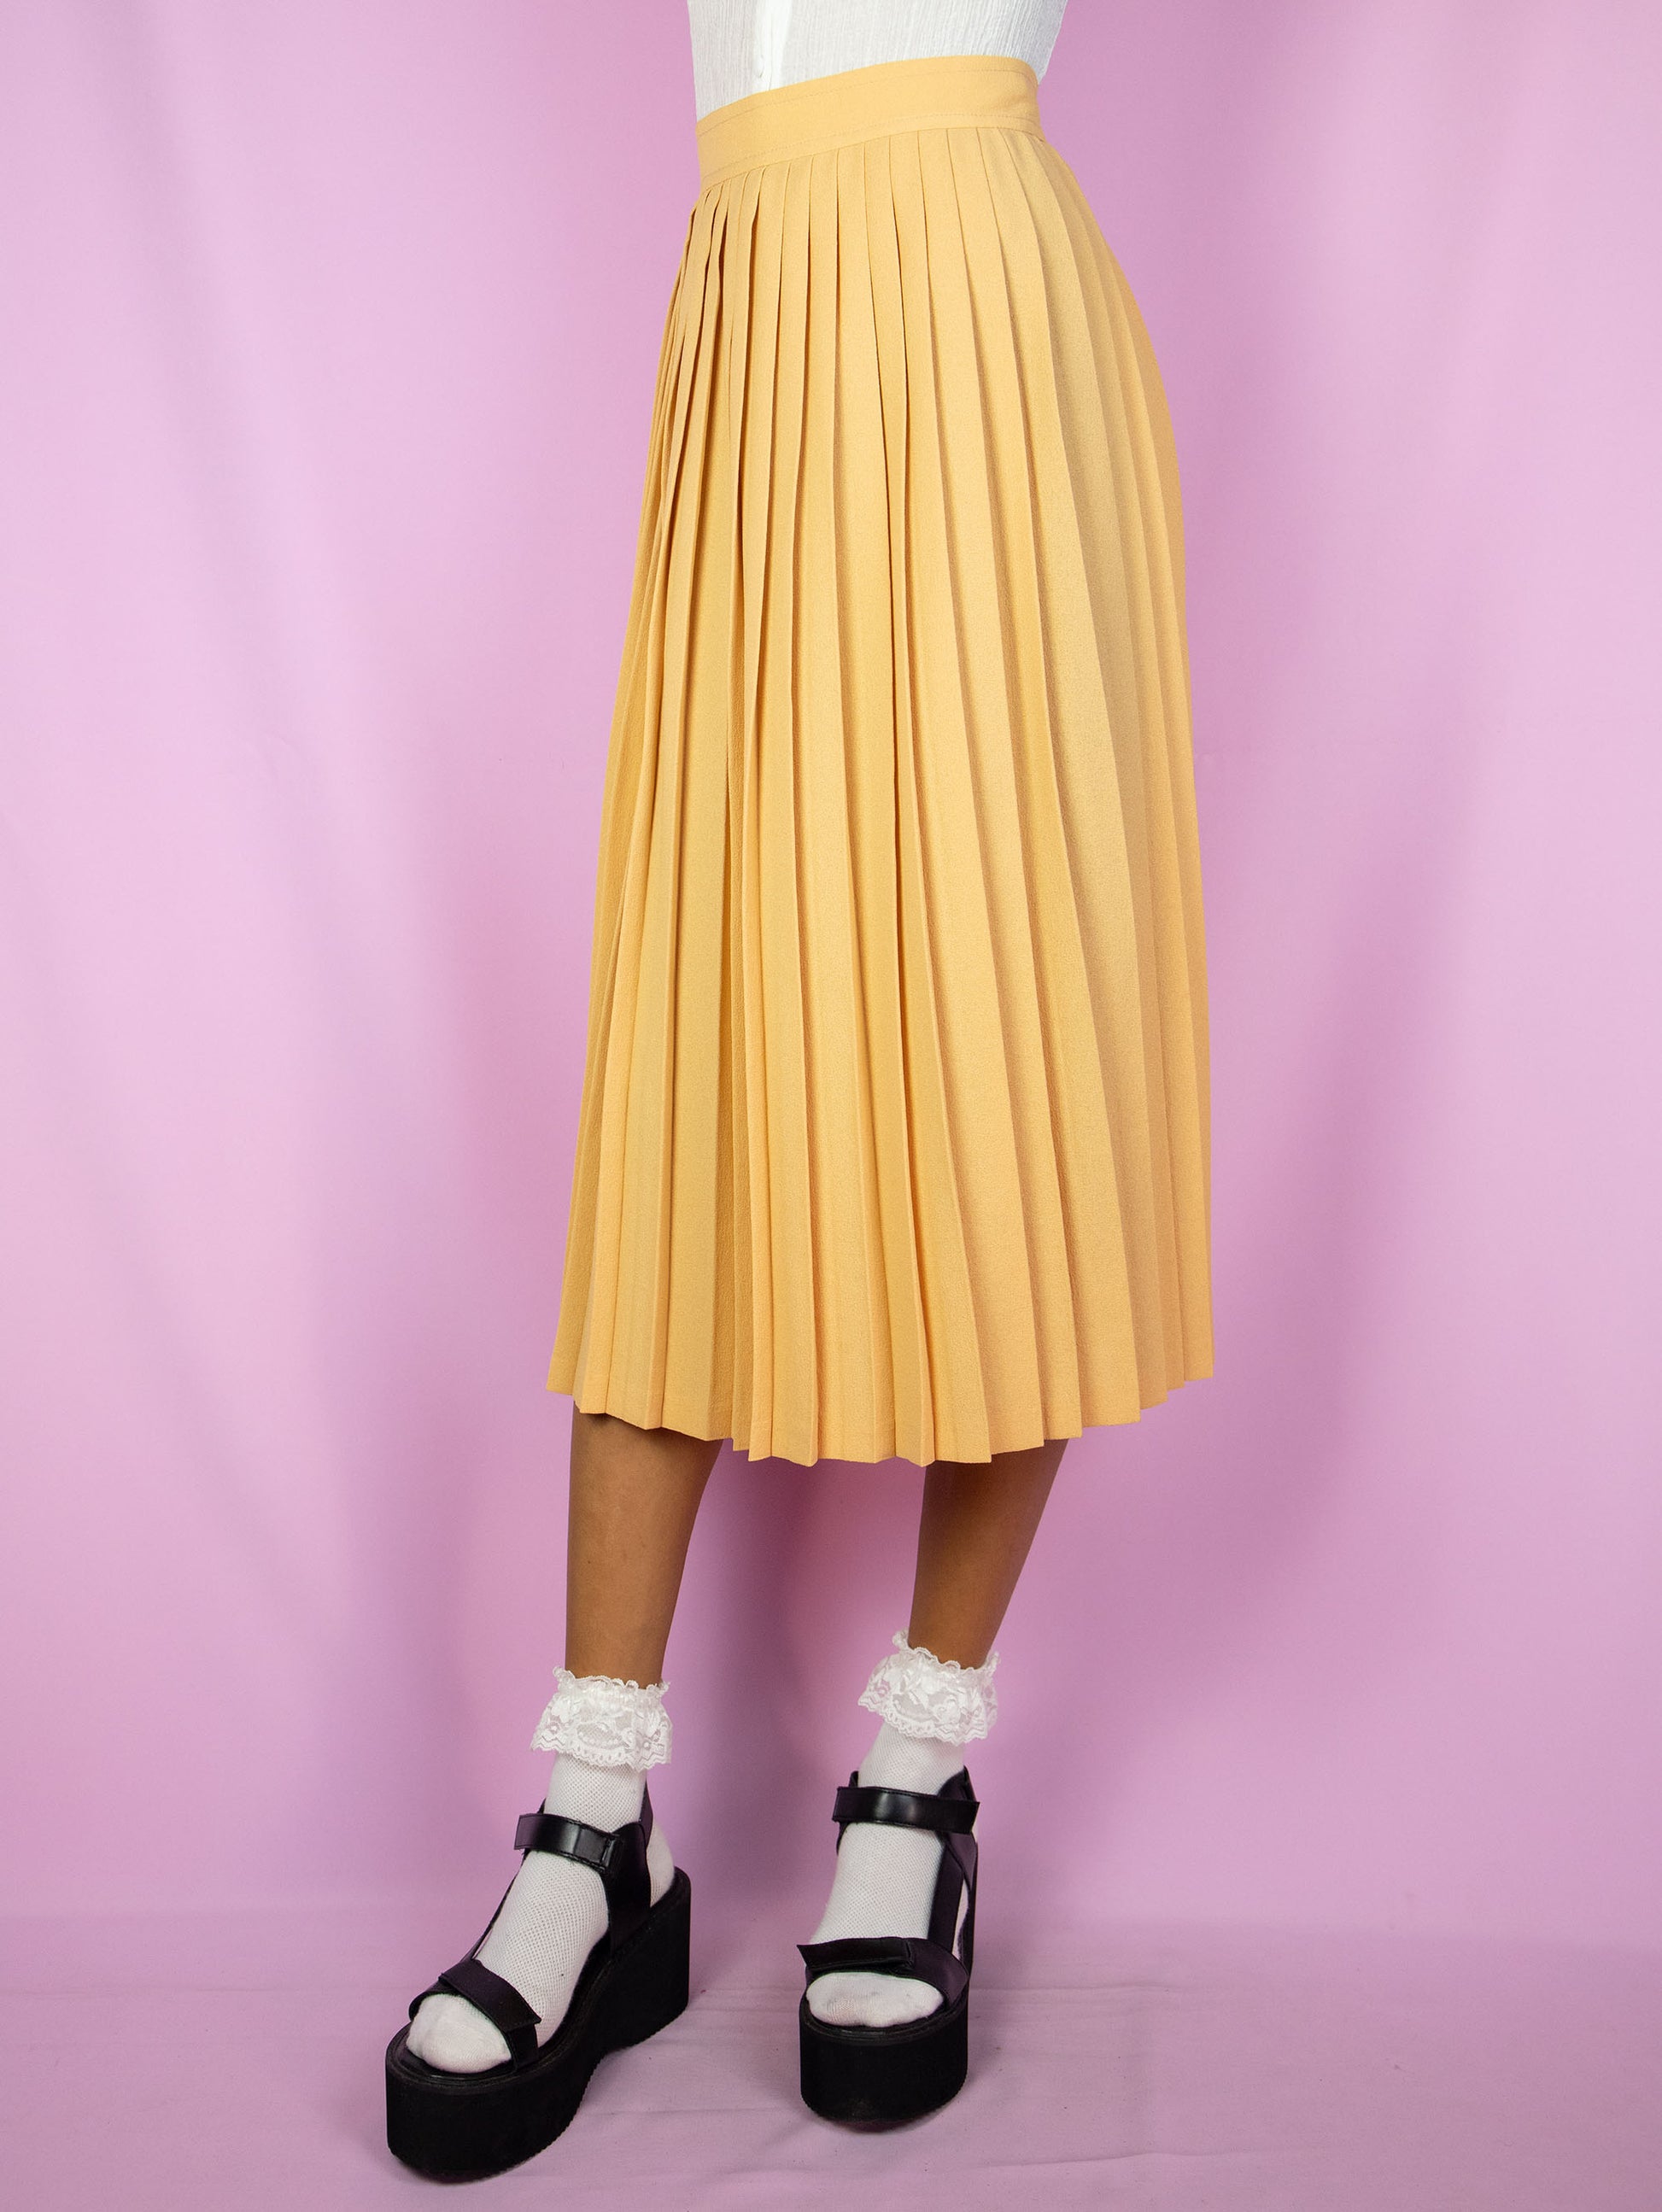 The Vintage 80s Orange Pleated Midi Skirt is a pastel light orange skirt with a back zipper closure. Classic preppy 1980s skirt.